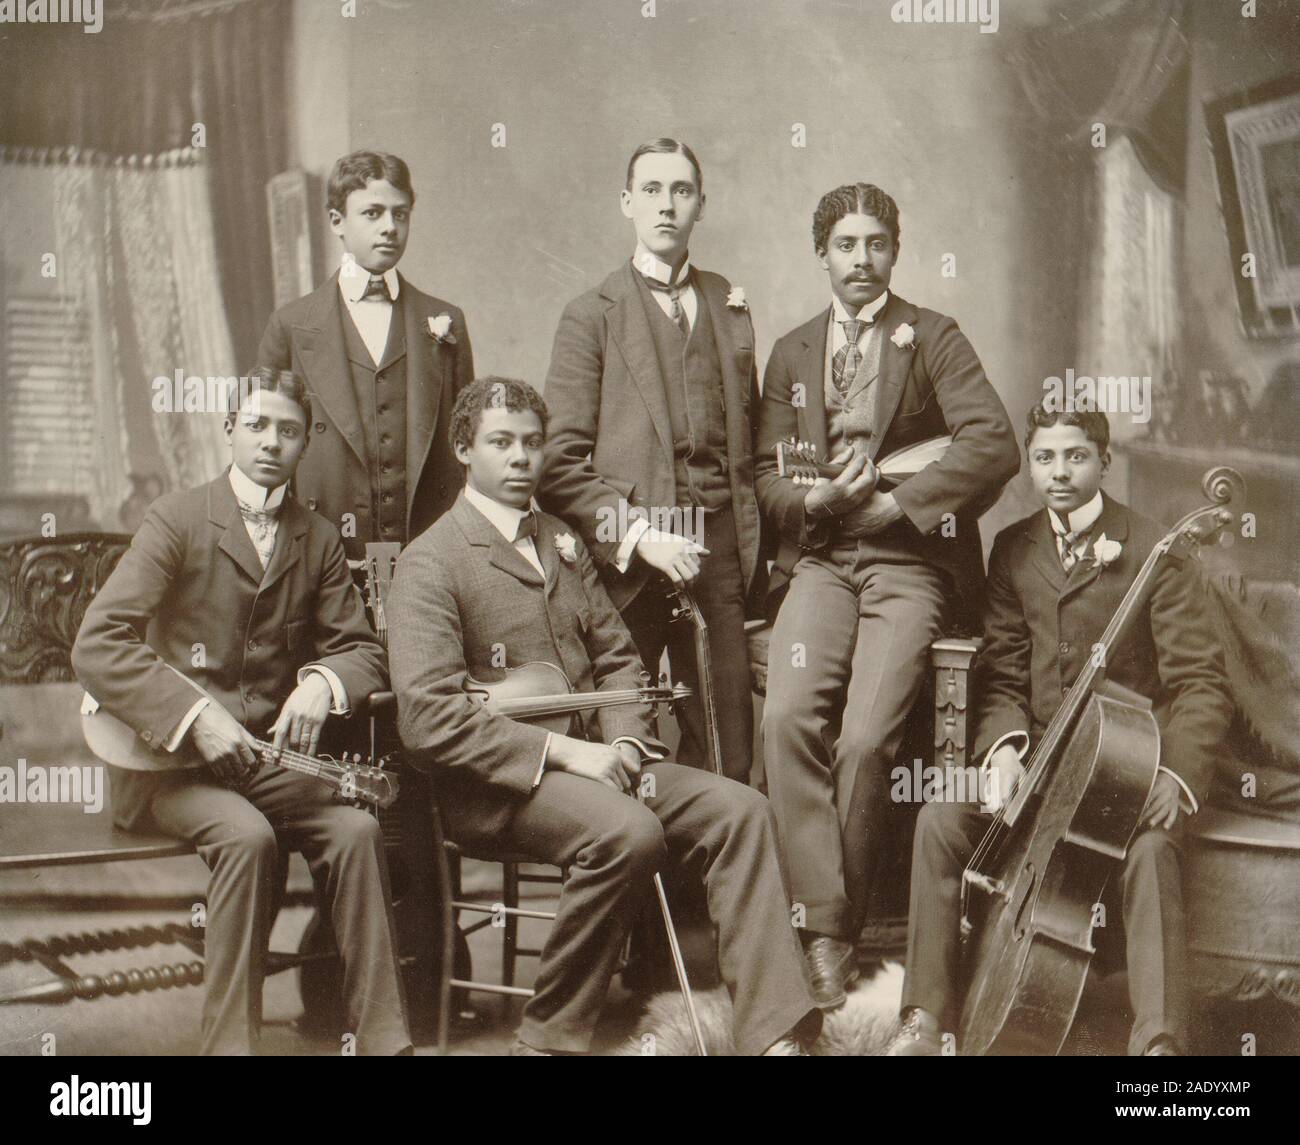 Summit Avenue Ensemble, Atlanta, Georgia - Photograph shows a group of six young men posed with their instruments in the photographer's home studio on Summit Avenue, Atlanta, Ga. From left: the photographer's twin sons Clarence and Norman Askew, son Arthur Askew, neighbor Jake Sansome, and sons Robert and Walter Askew. Circa 1900 Stock Photo